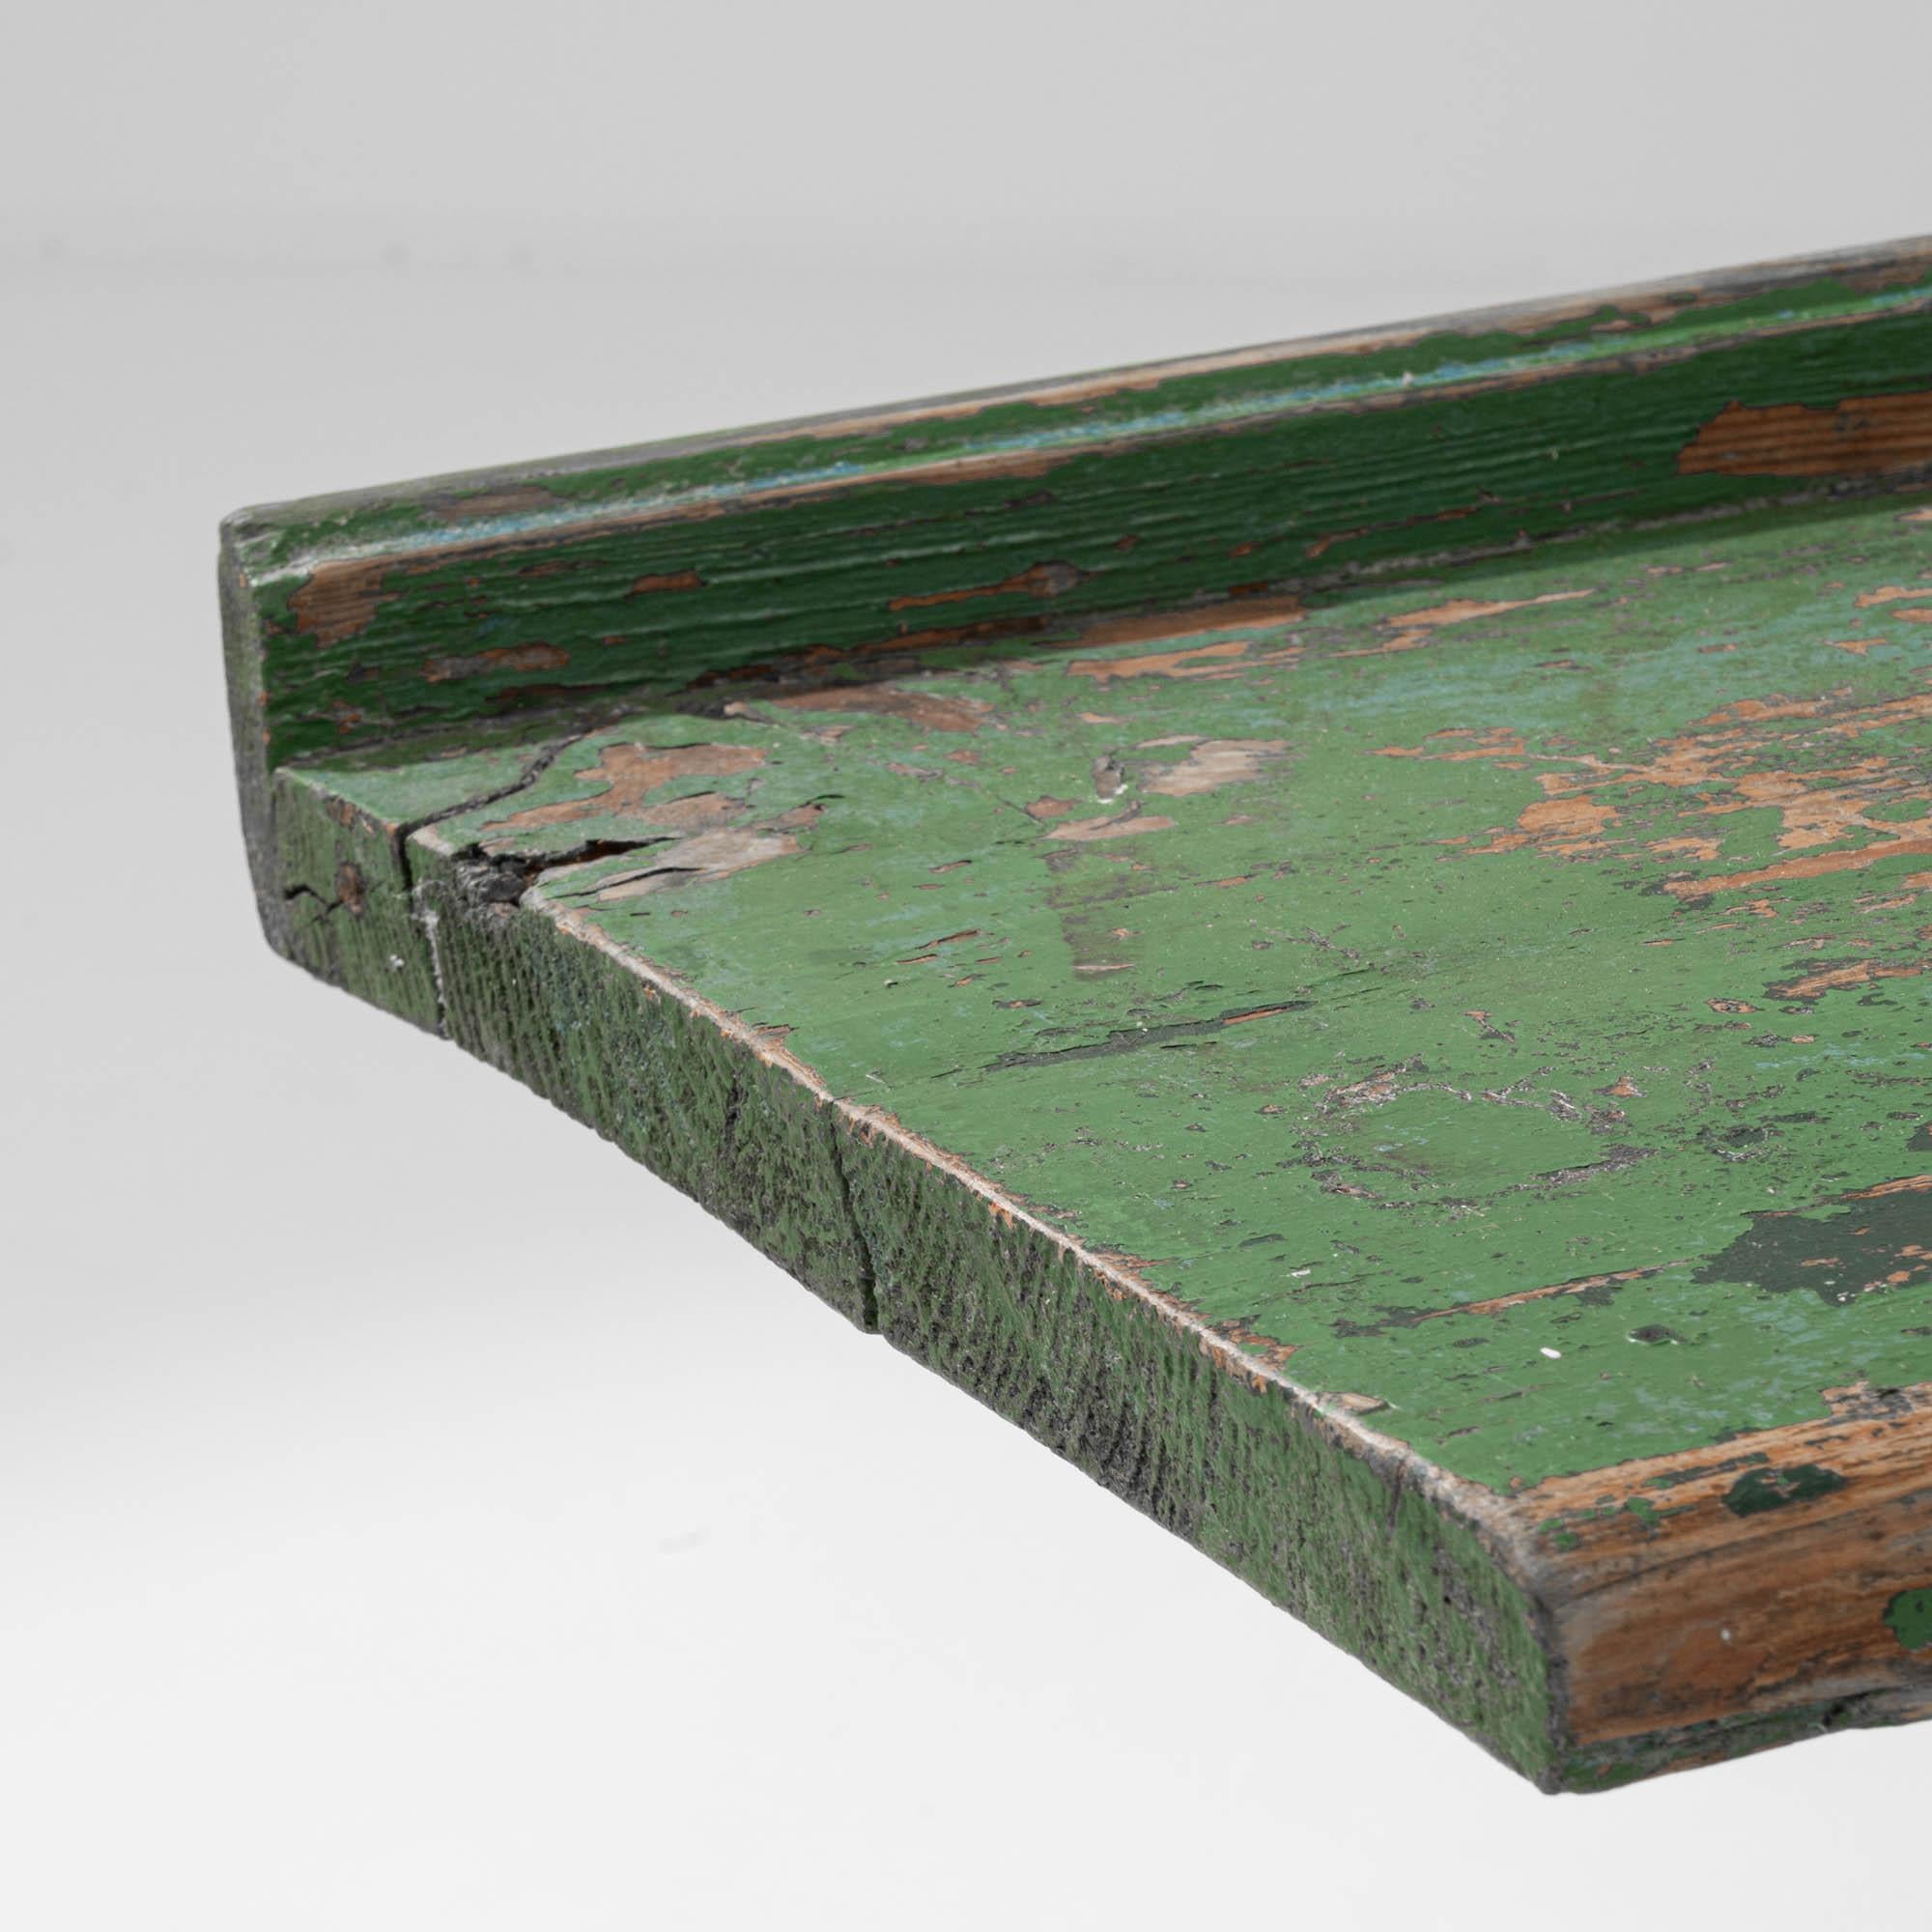 19th Century Central European Wood Patinated Bench 5